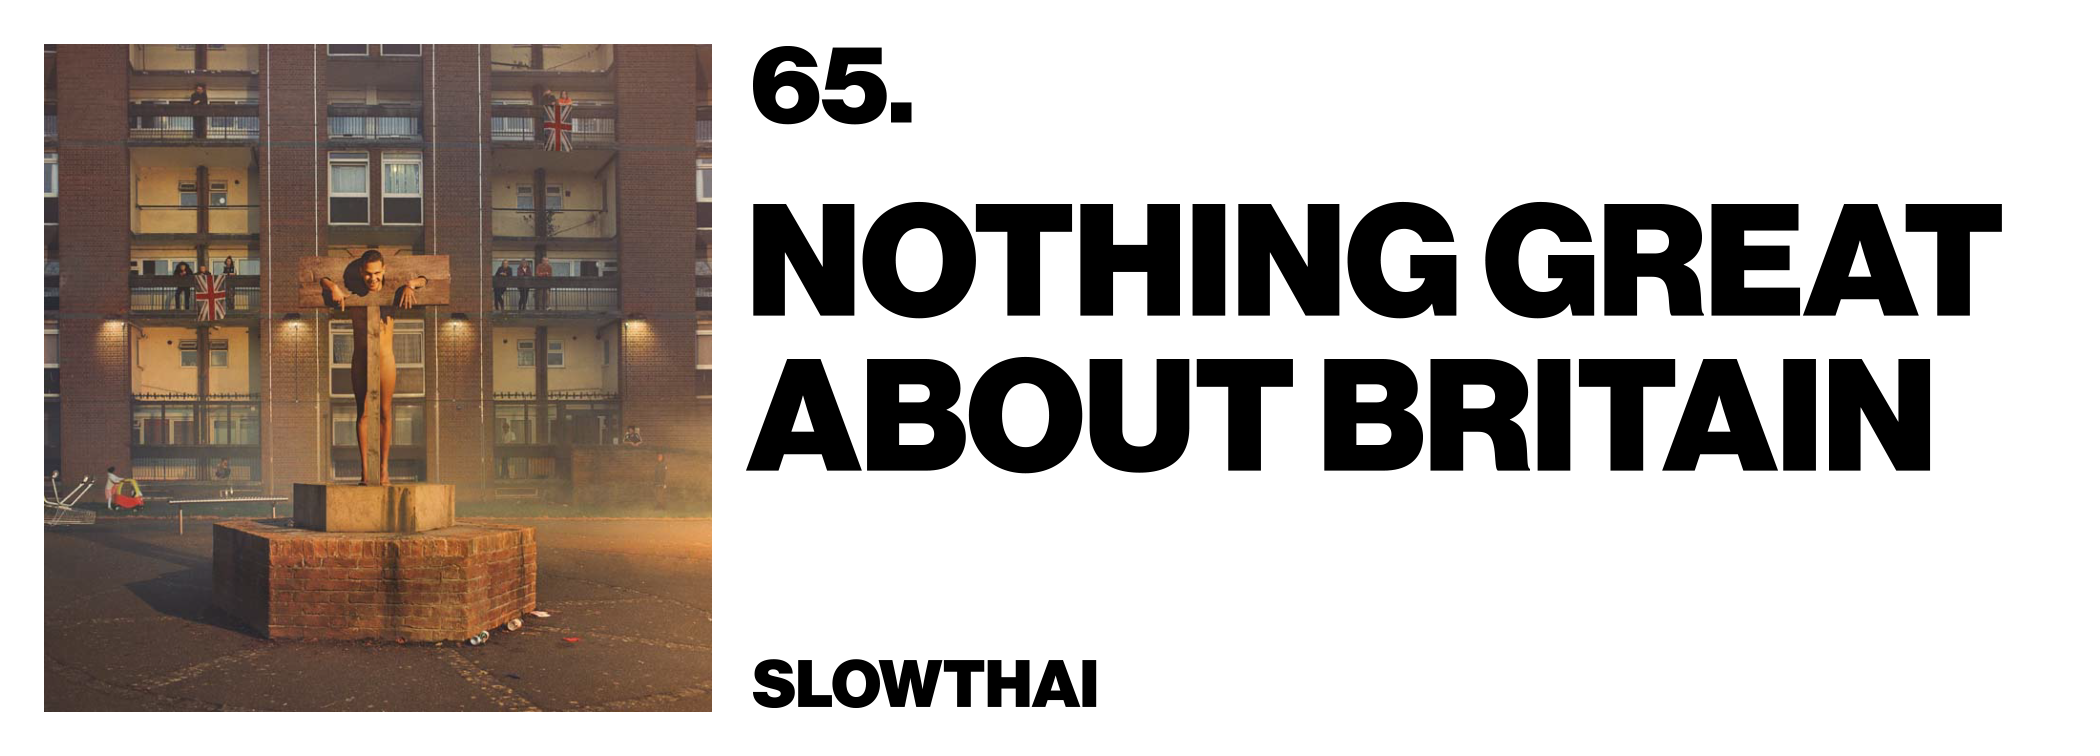 1575926823802-65-Slowthai-Nothing-Great-About-Britain